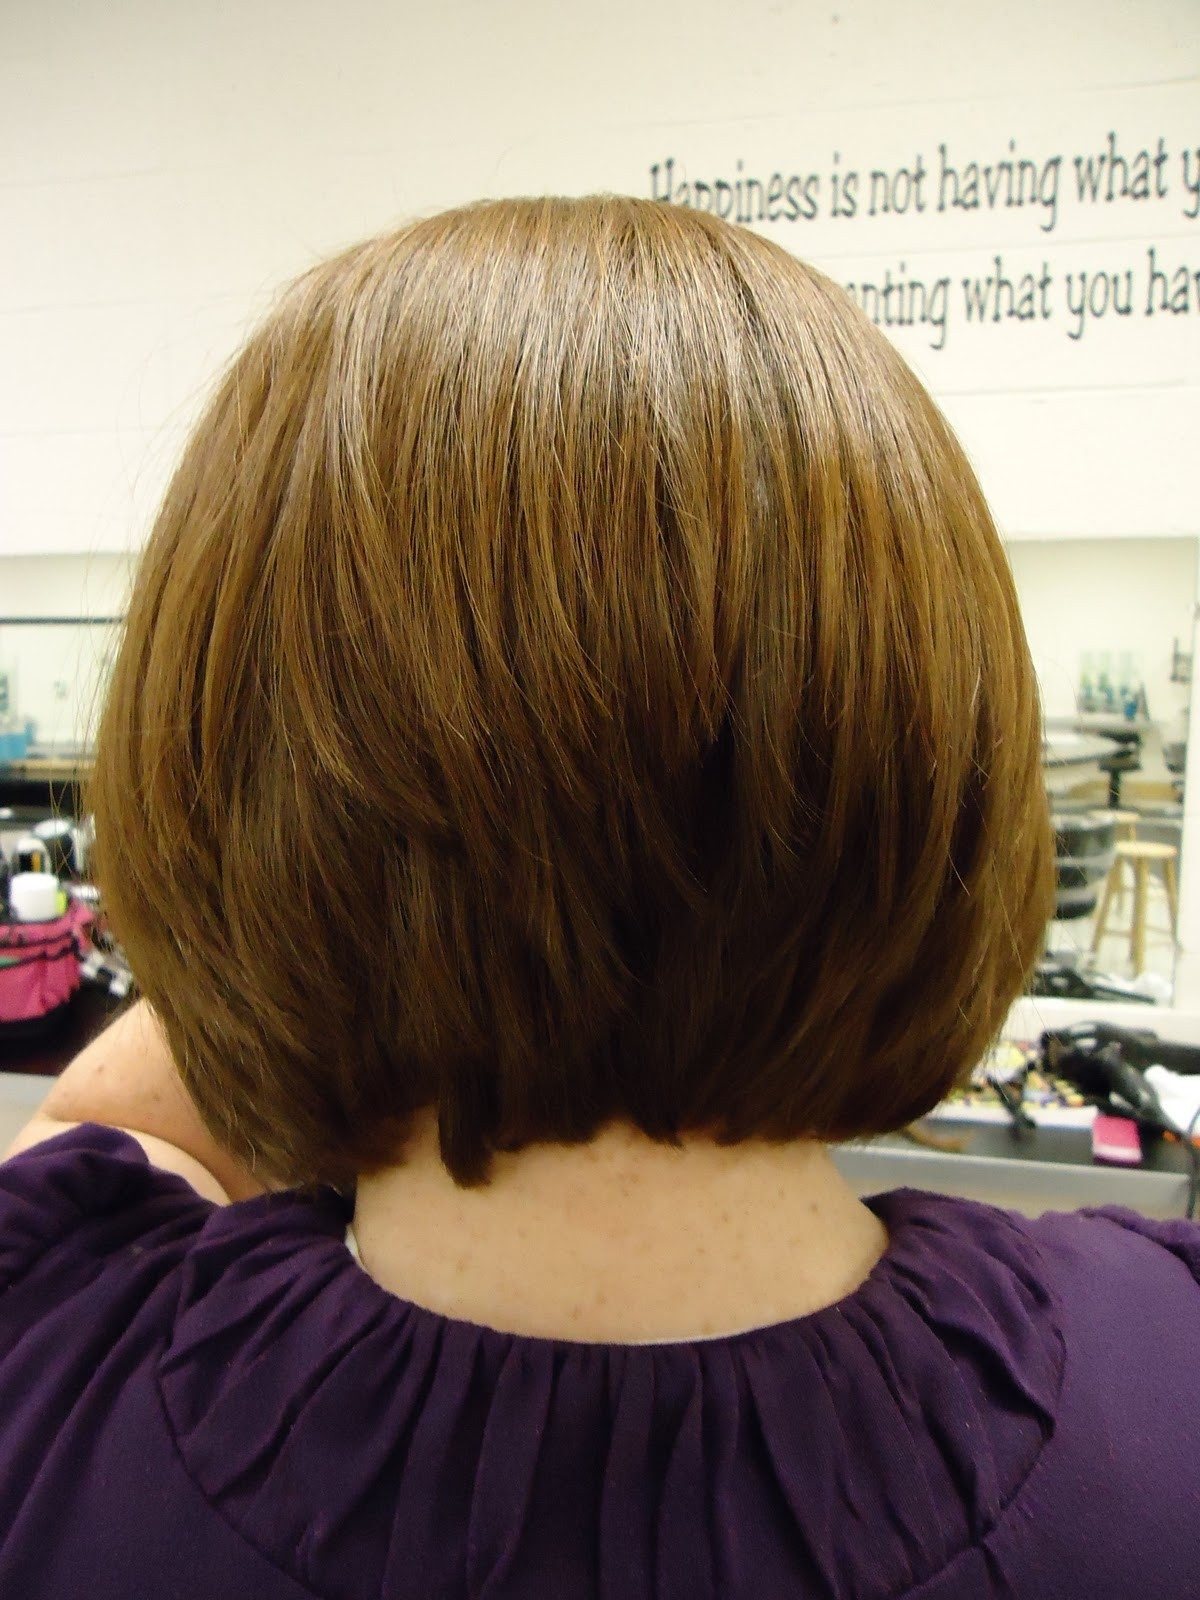 Graduated Bob Hairstyles Back View
 Back View Short Haircuts For Women Hairstyles Fashion